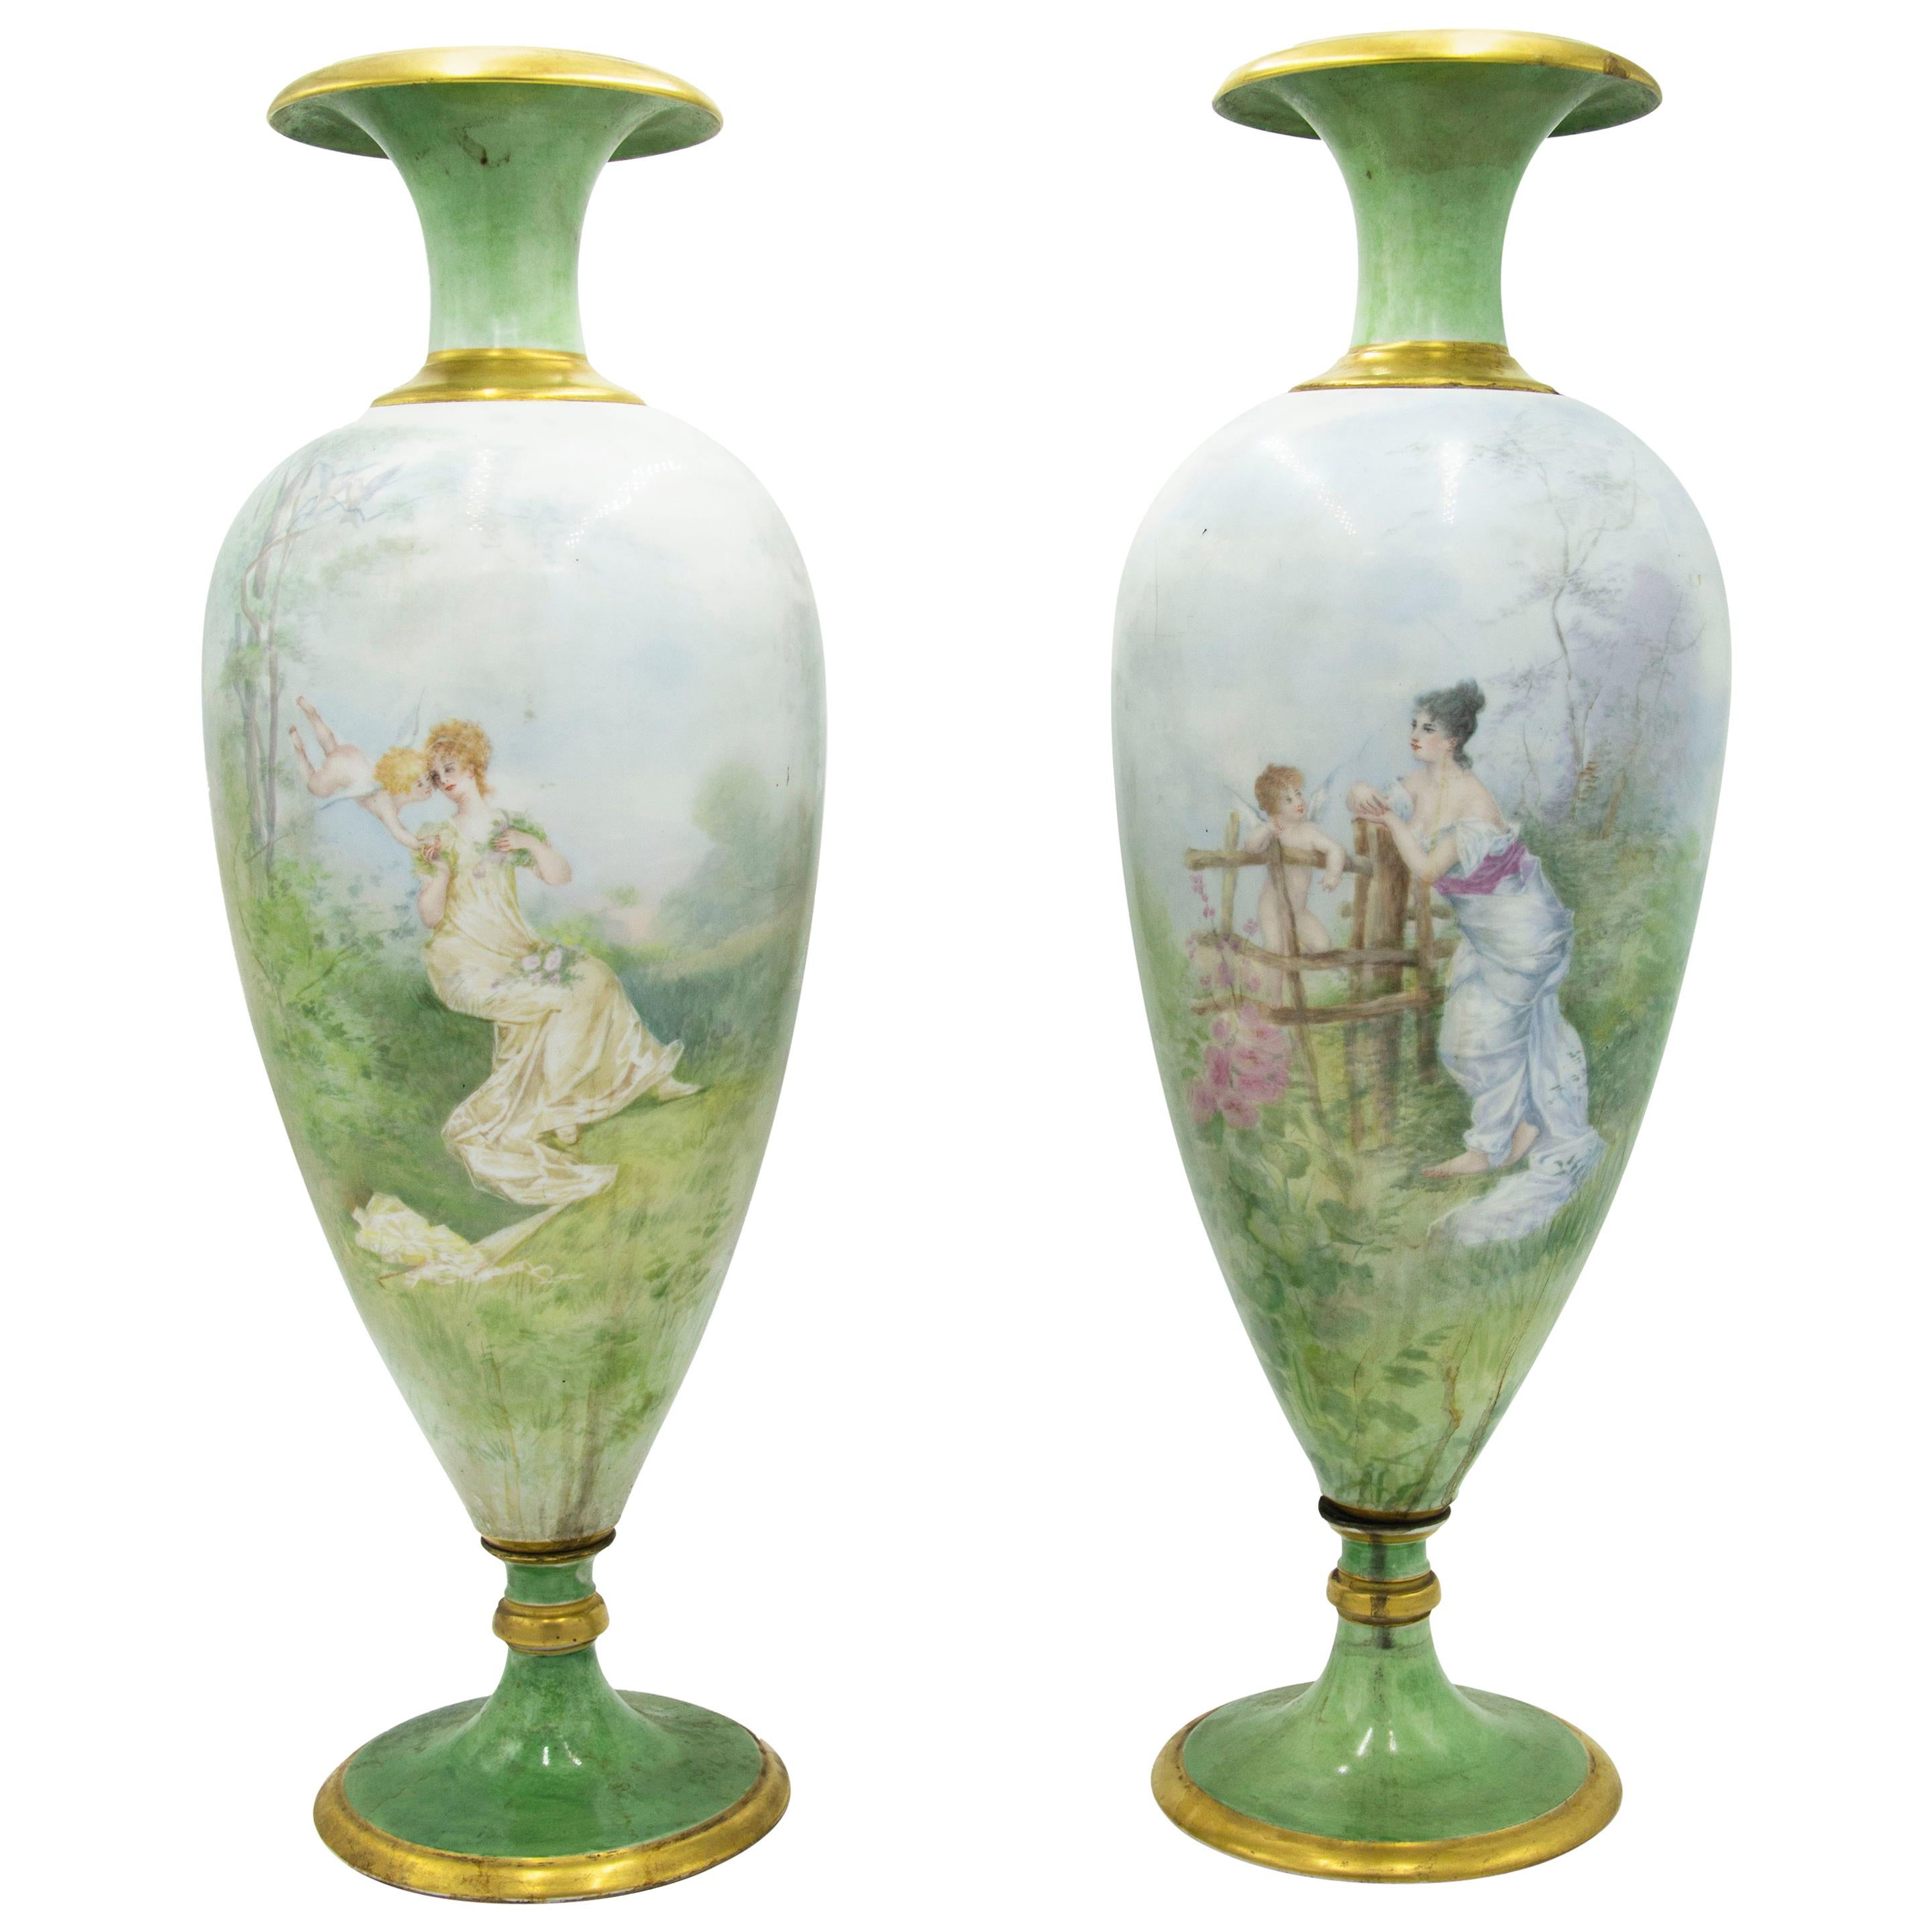 Pair of French Victorian Green Limoges Porcelain Vases